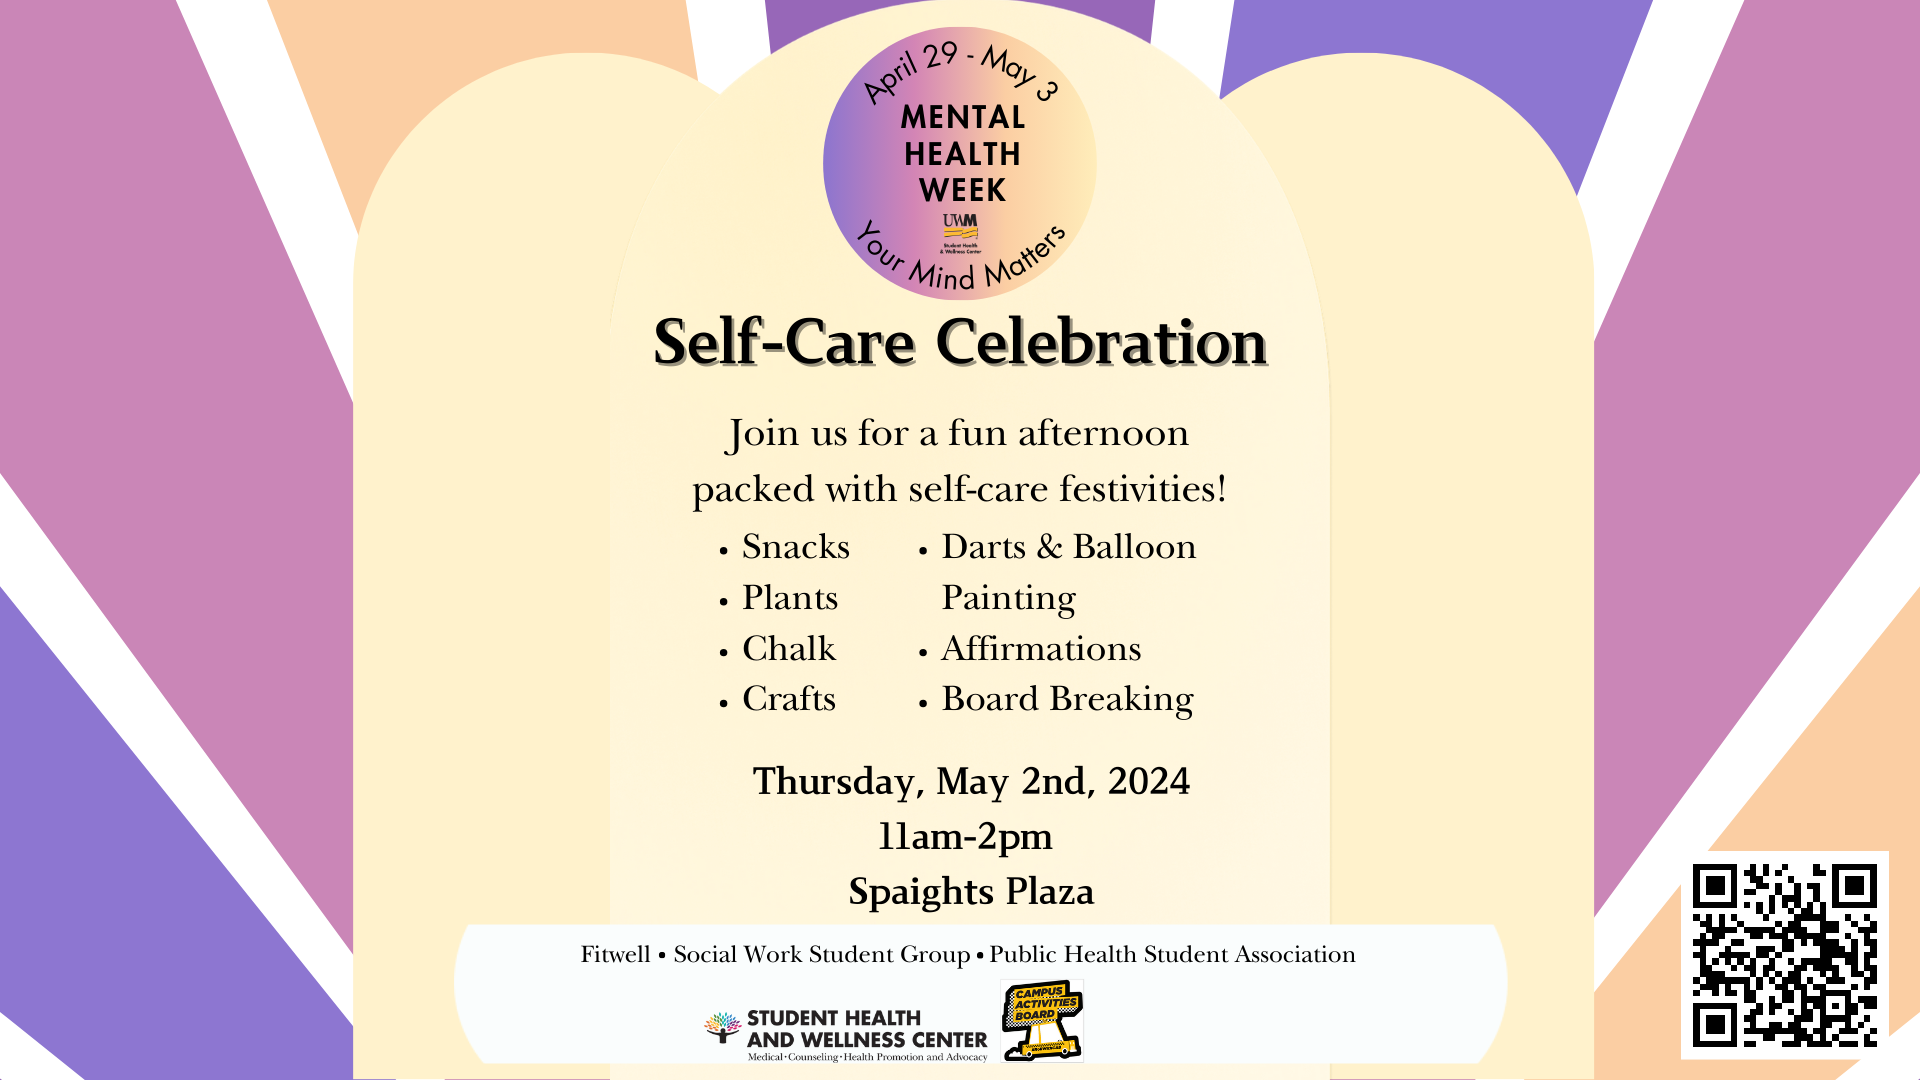 A graphic with information about a self-care celebration block party at spaight's plaza for mental health week.